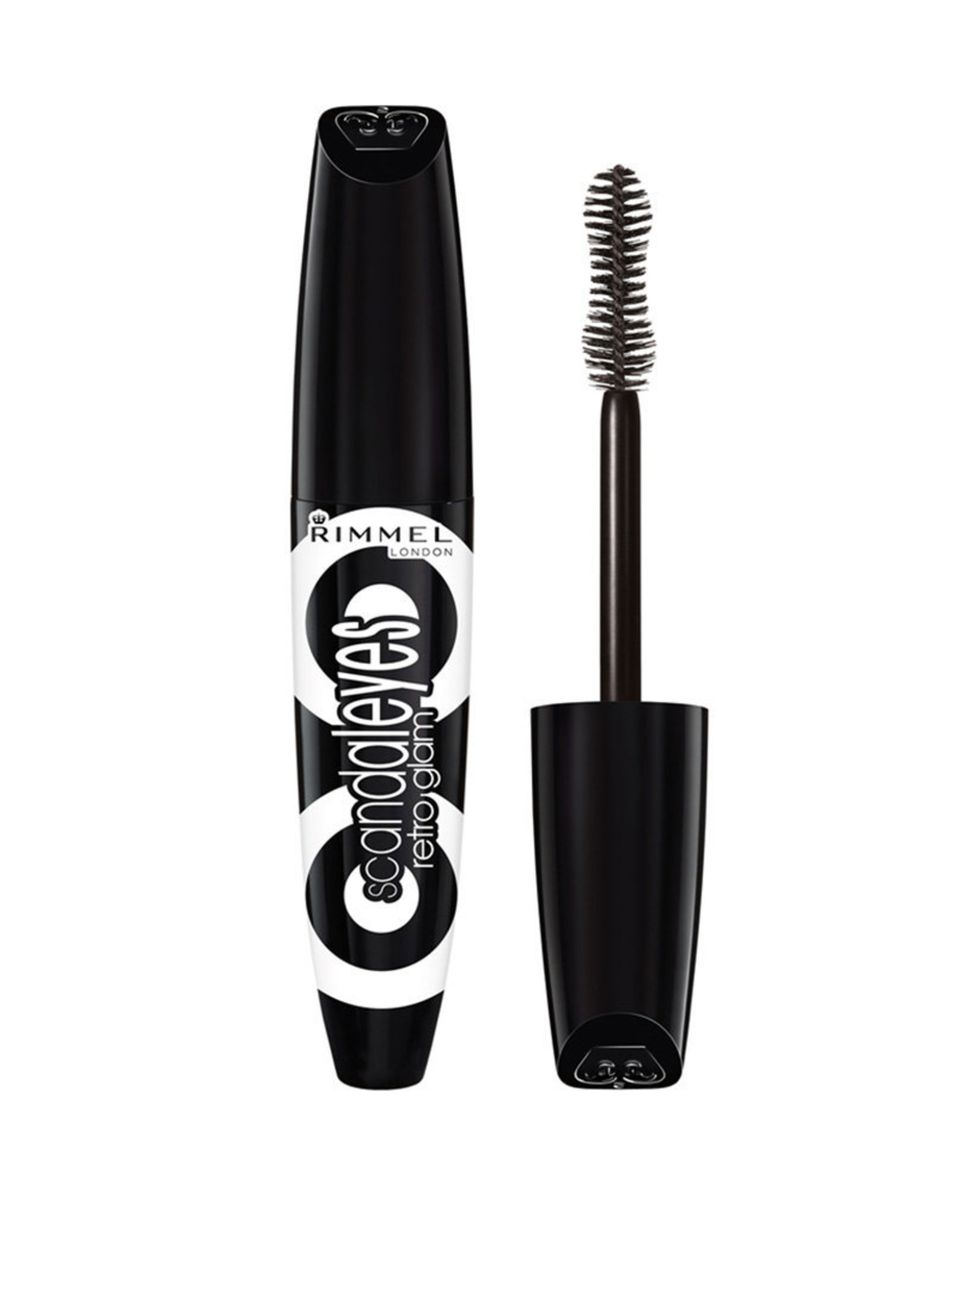 <p><a href="http://www.boots.com/en/Rimmel-London-Scandaleyes-Retro-Glam-Mascara_1364903/">Rimmel Scandaleyes Retro Glam Mascara in Black, £6.99.</a></p><p>Wiggle the wand from the base of your lashes upwards and for a fan-lash effect.</p>